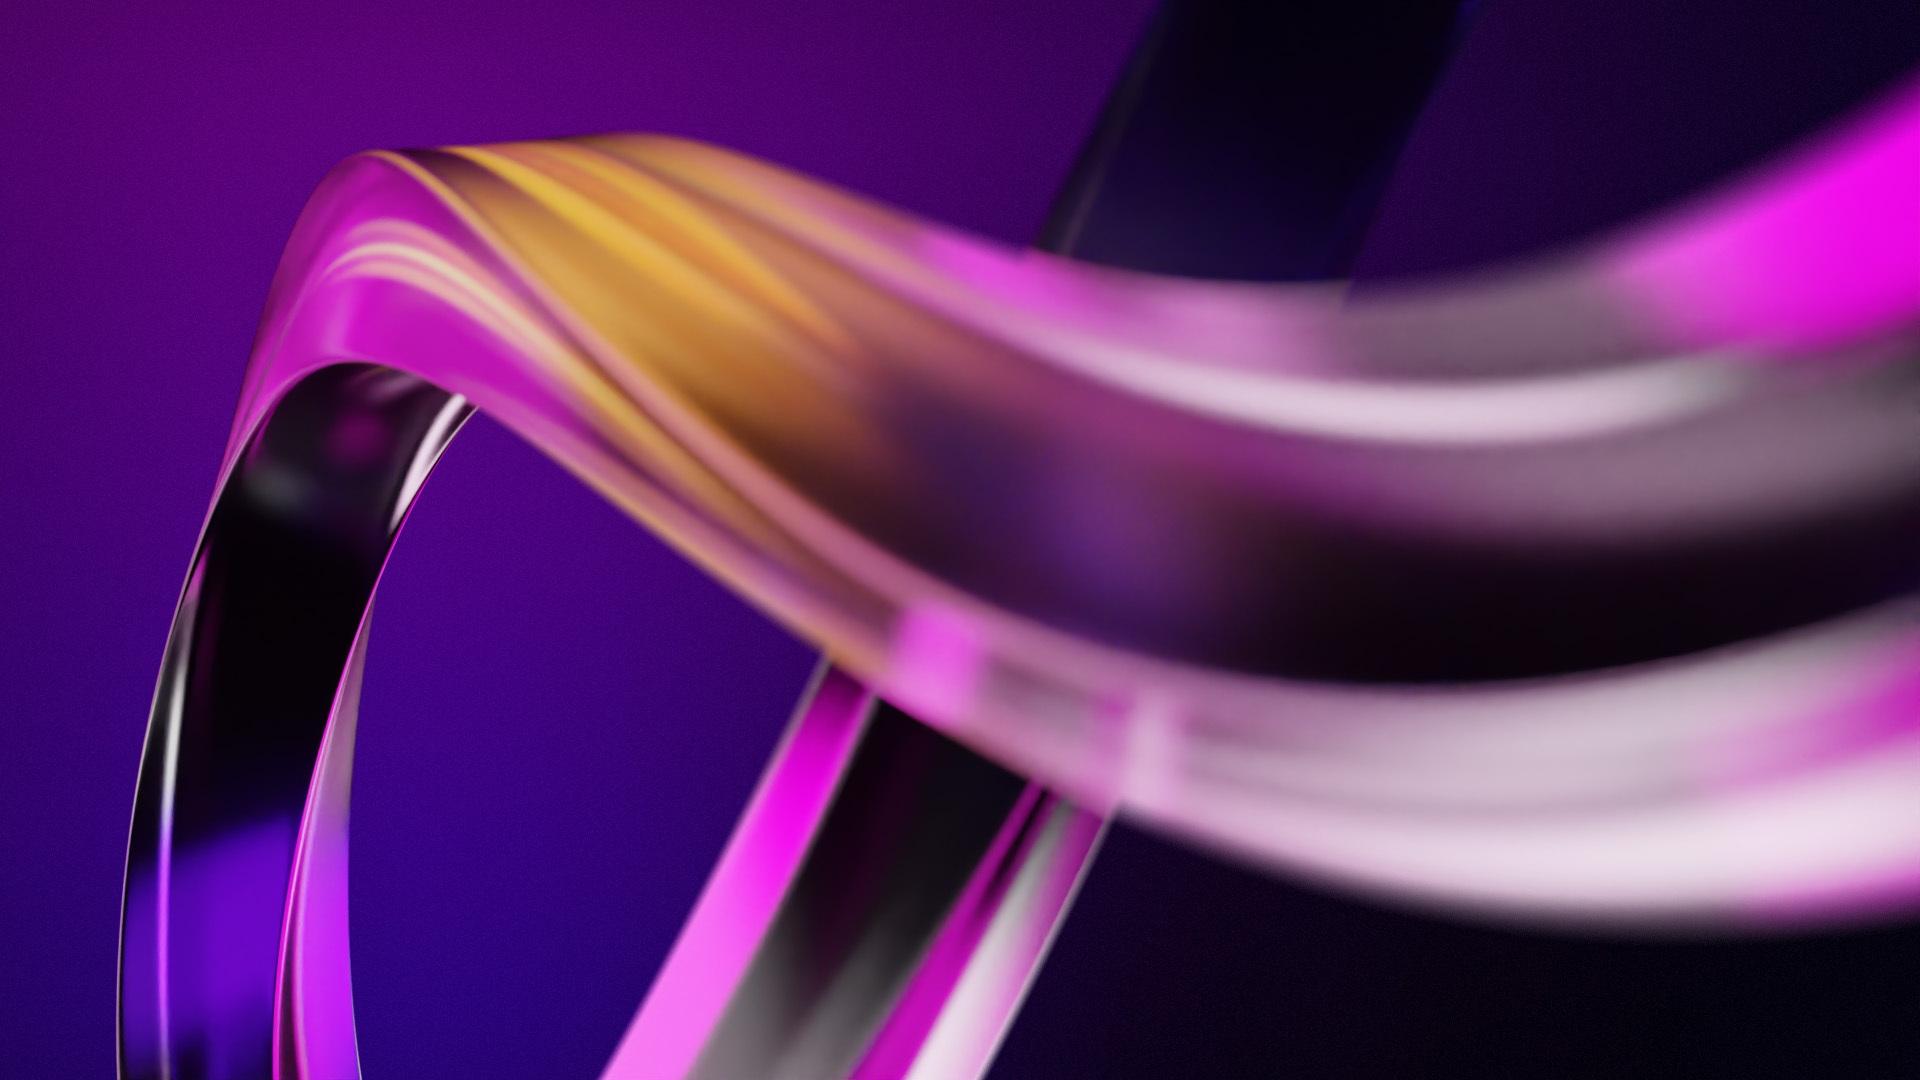 Section of infinity loop with a pulse of purple energy.